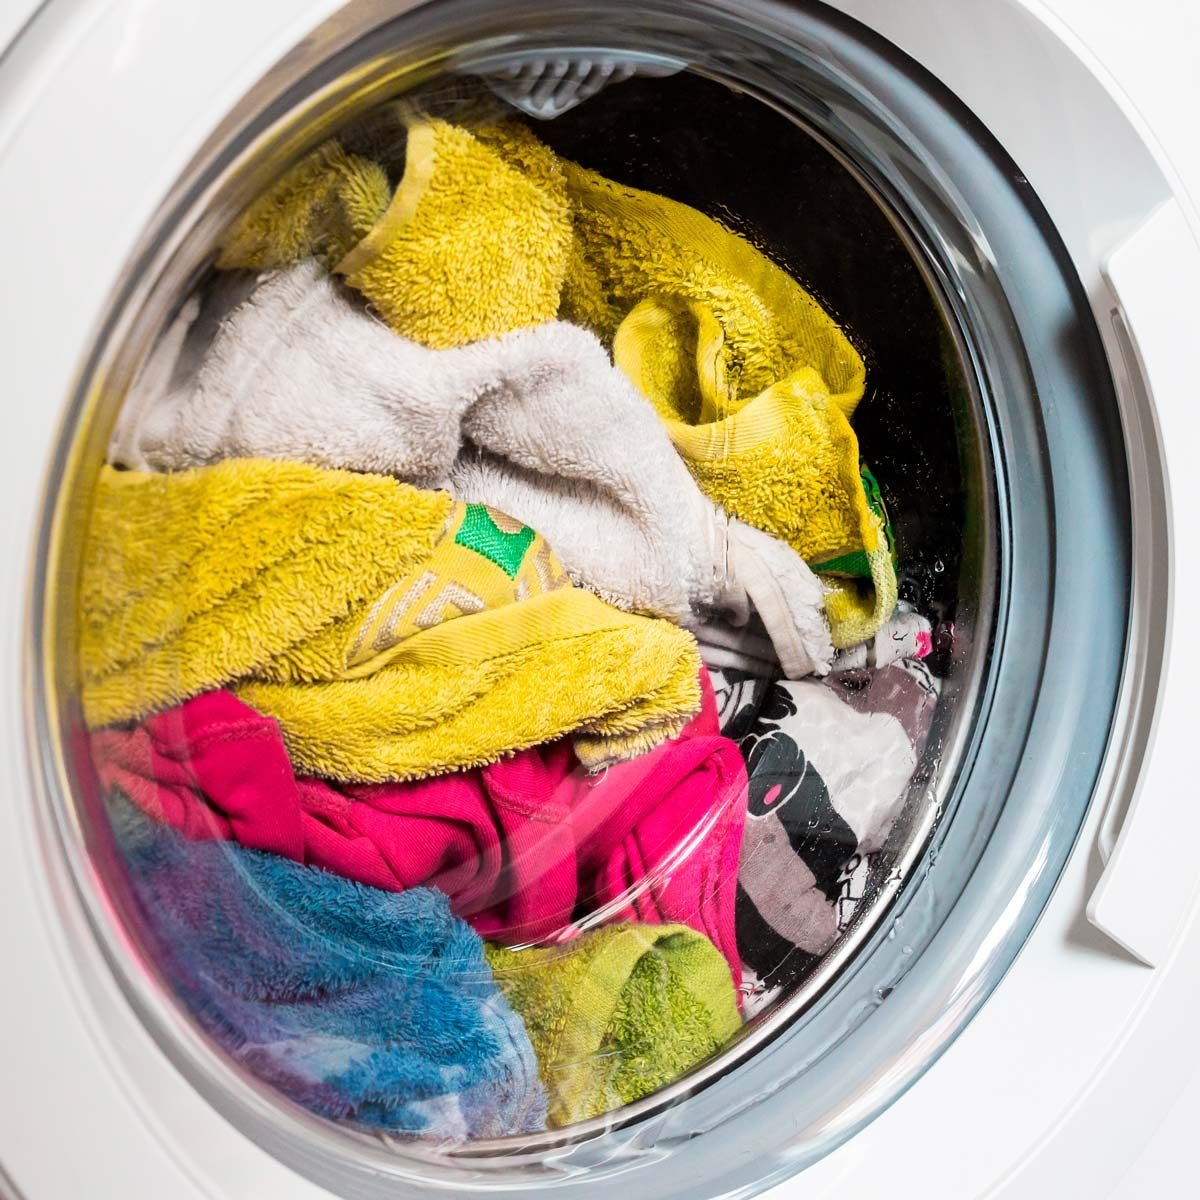 How To Clean a Washing Machine - How to Clean Front or Top Loading Washing  Machine